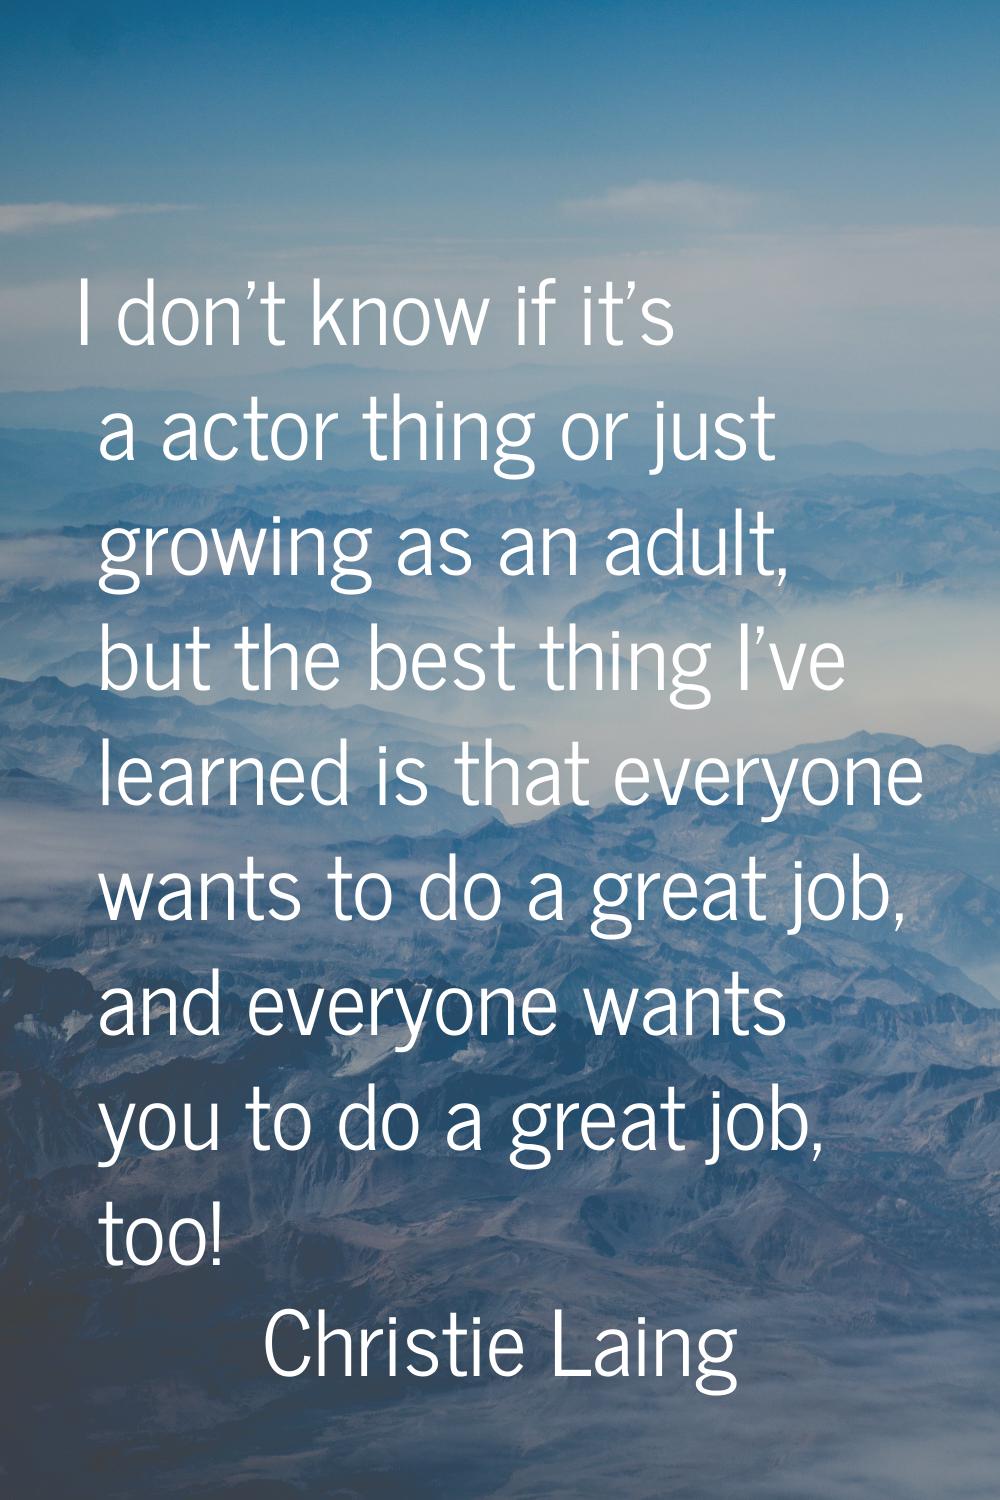 I don't know if it's a actor thing or just growing as an adult, but the best thing I've learned is 